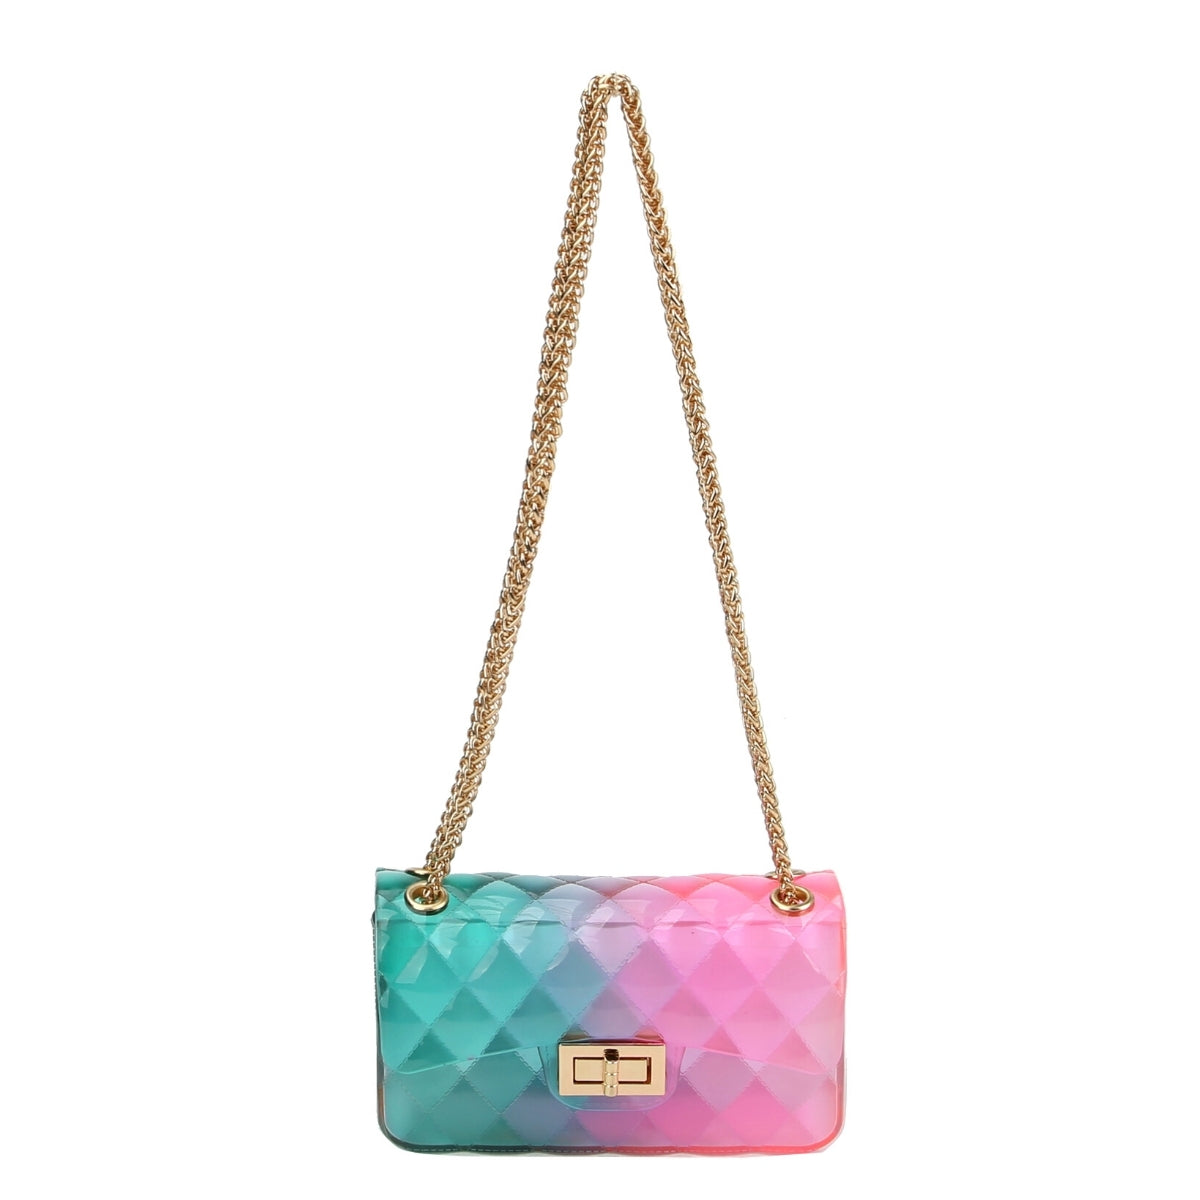 Teal and Pink Quilted Jelly Crossbody